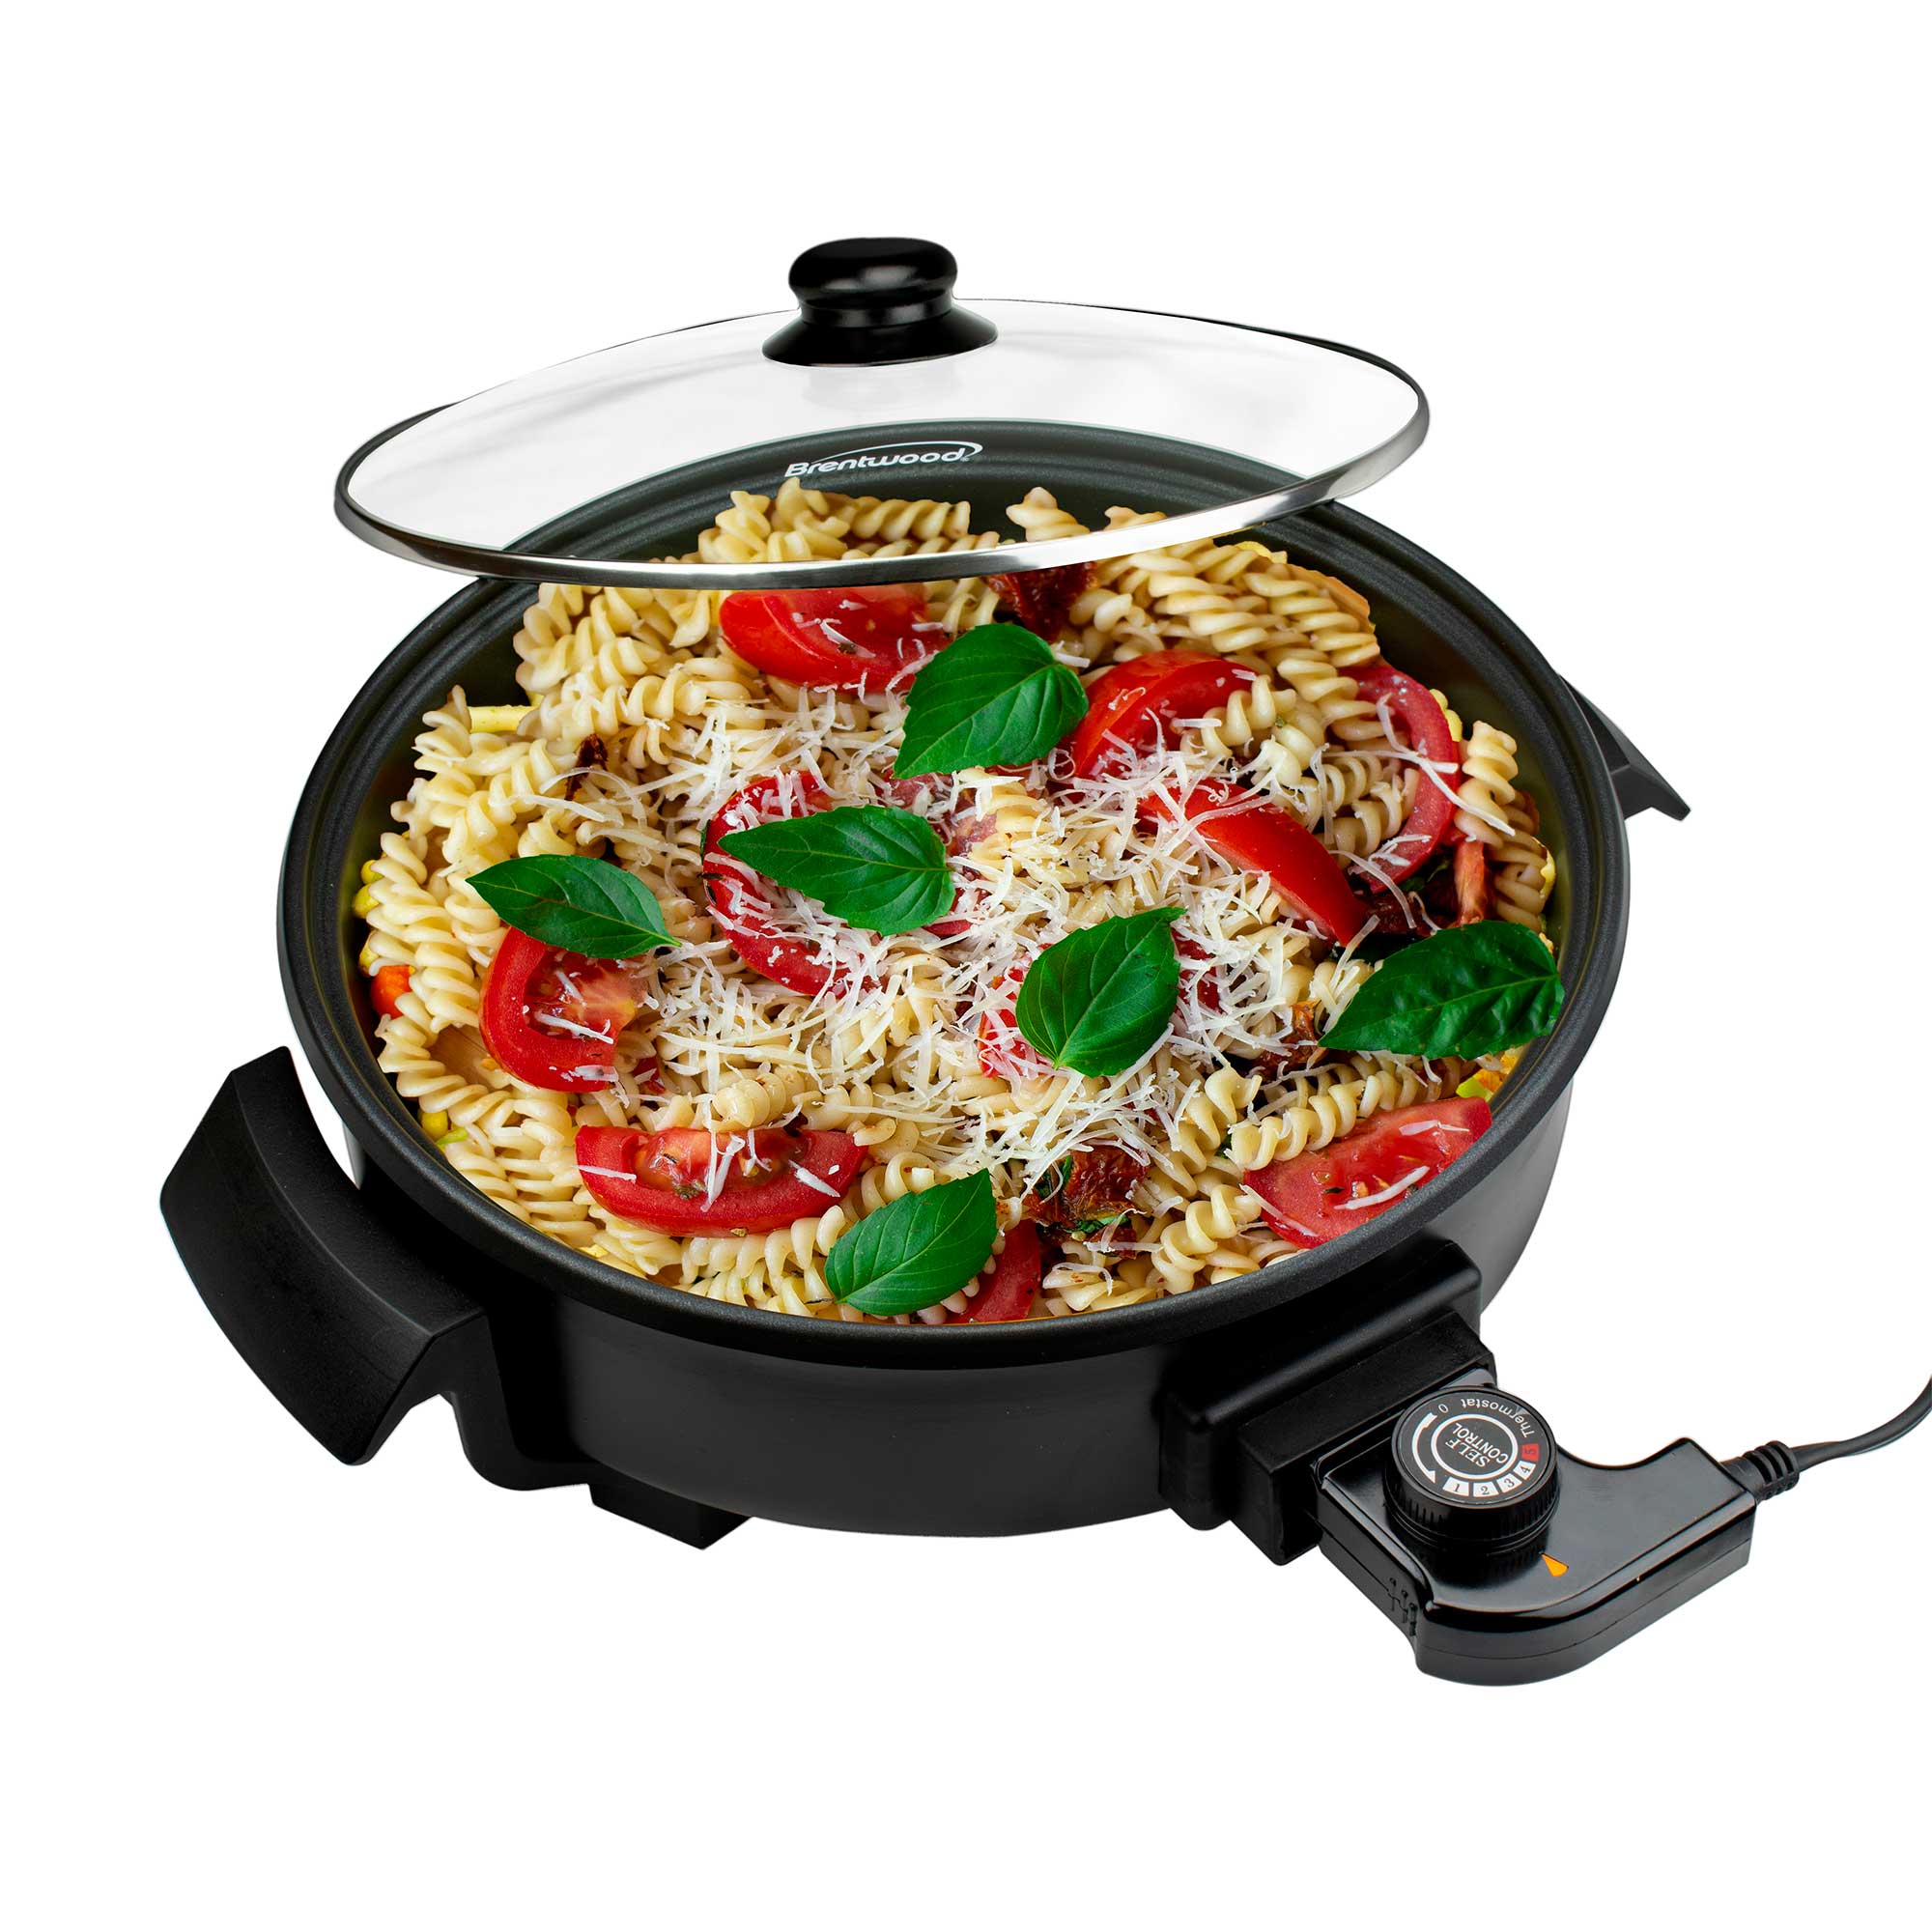 Brentwood SK-46 8-Inch Nonstick Electric Skillet in Black with Lid